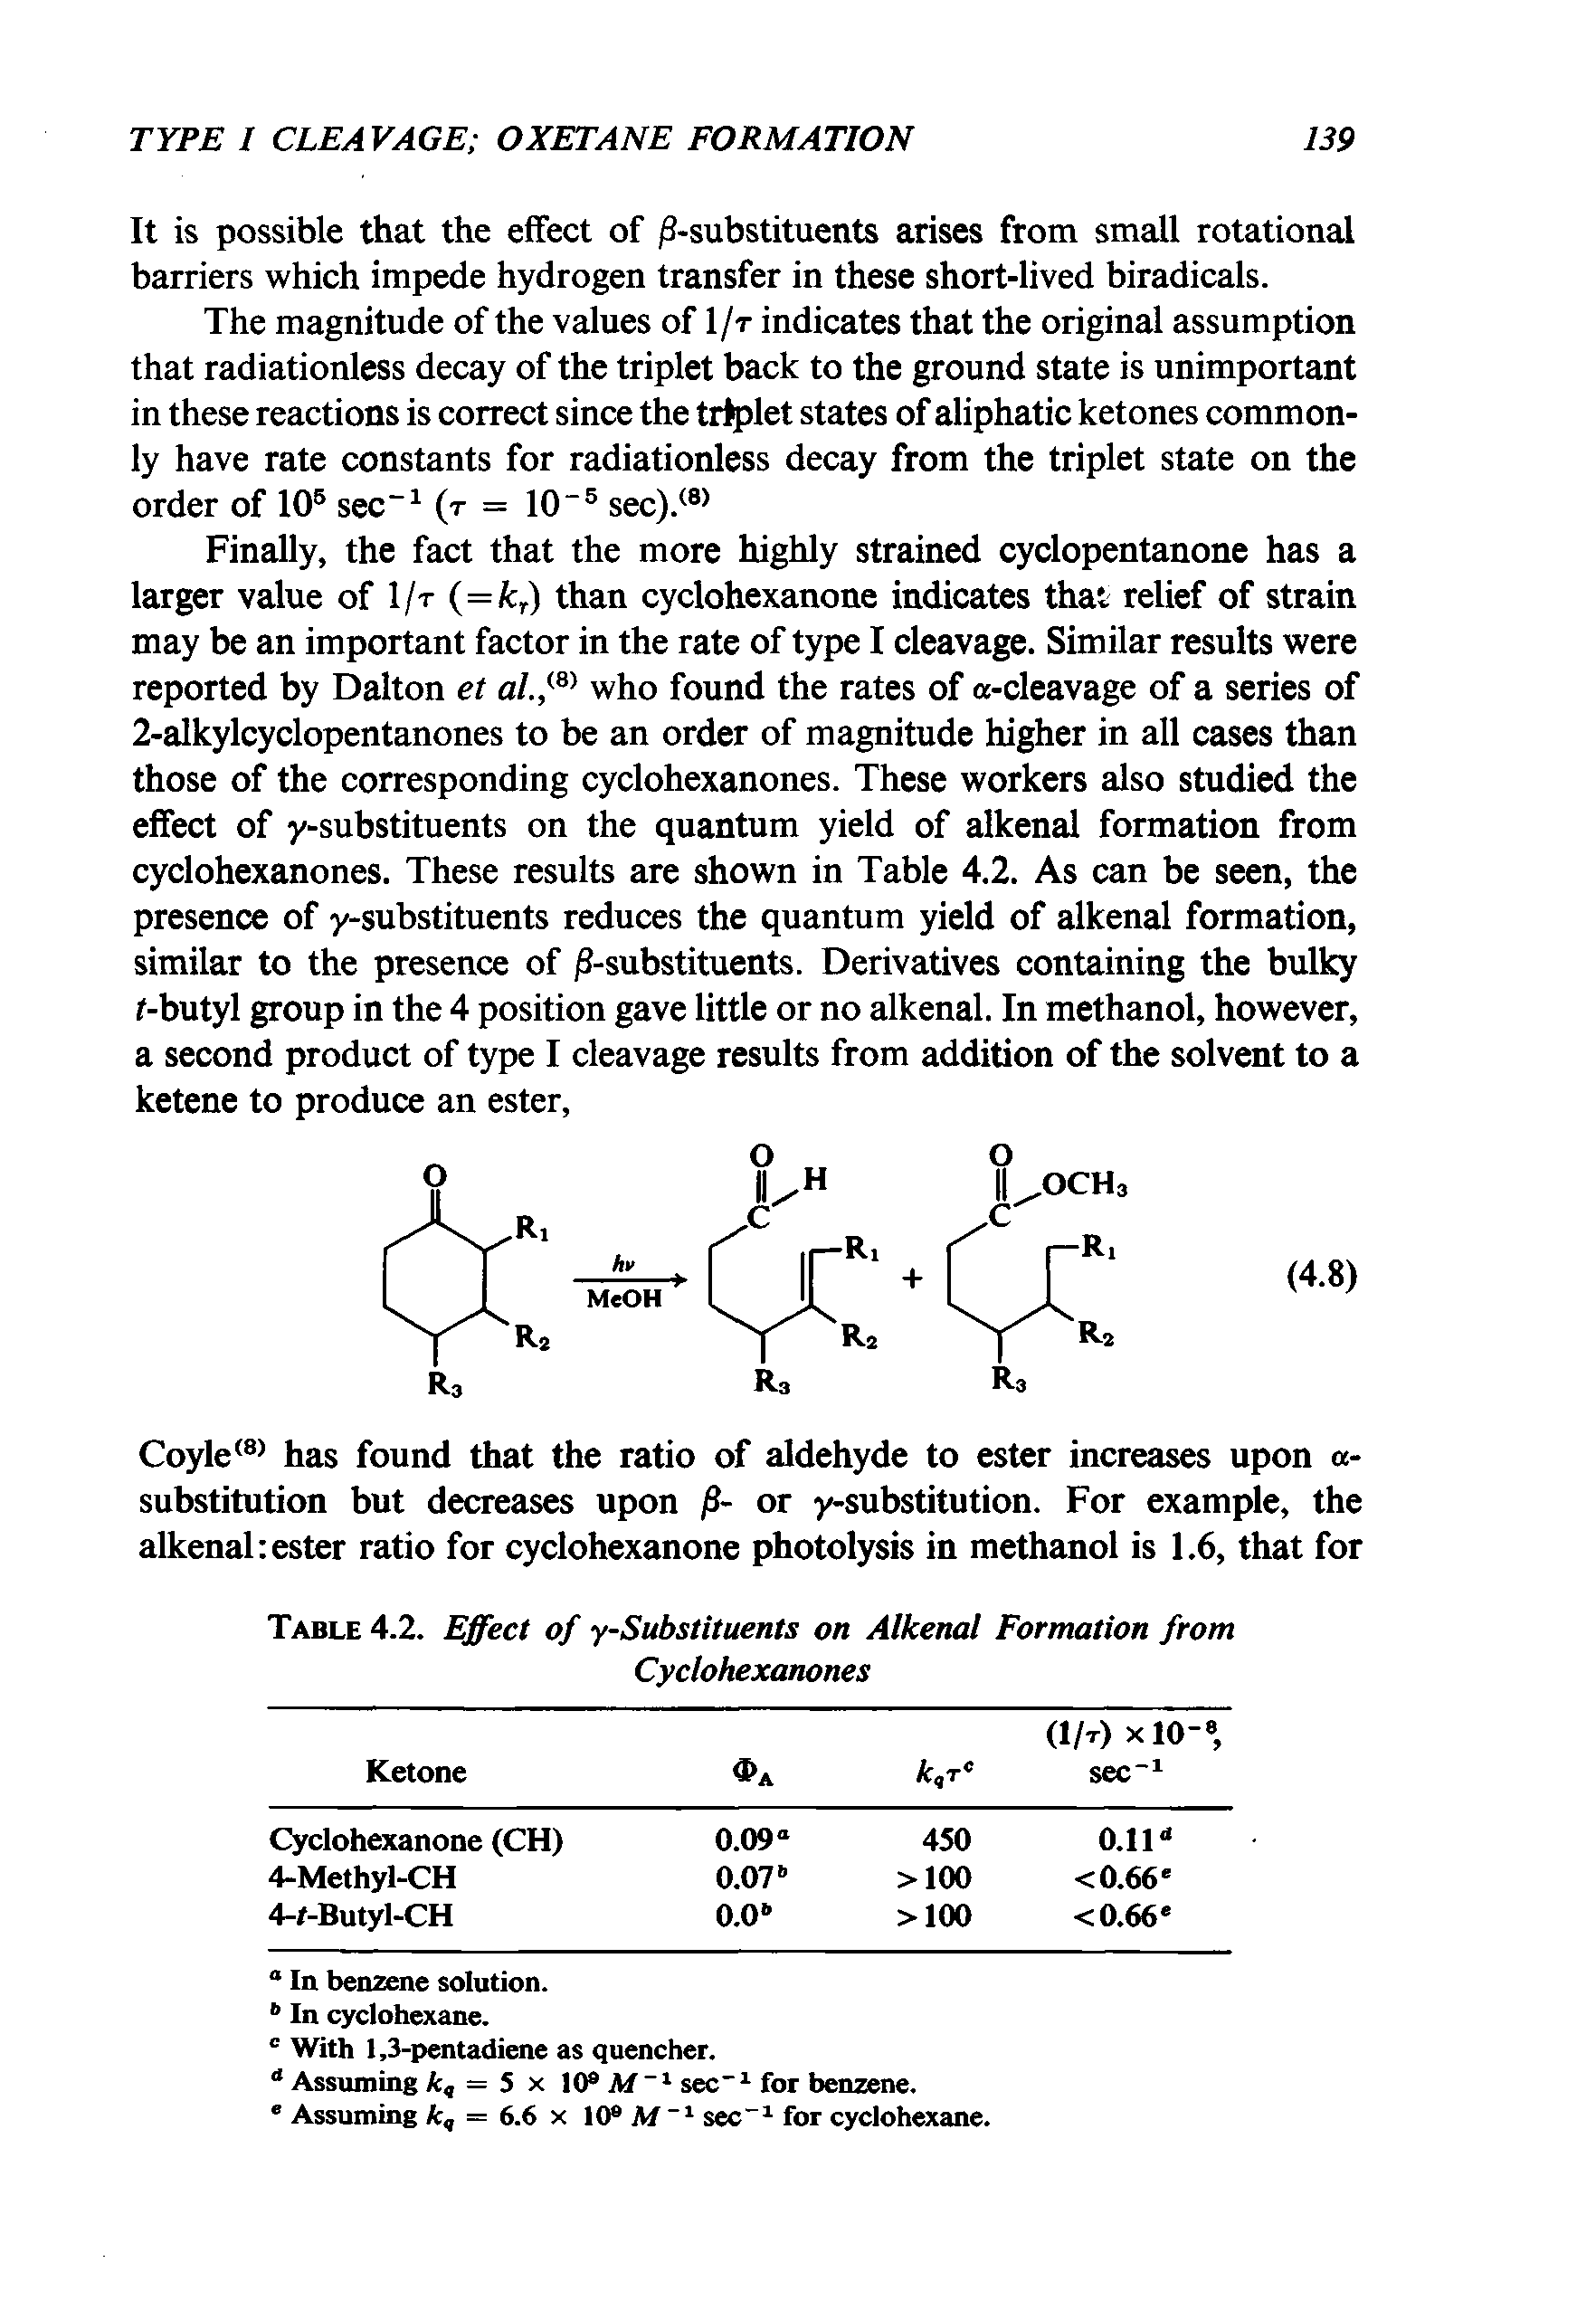 Table 4.2. Effect of y-Substituents on Alkenal Formation from Cyclohexanones...